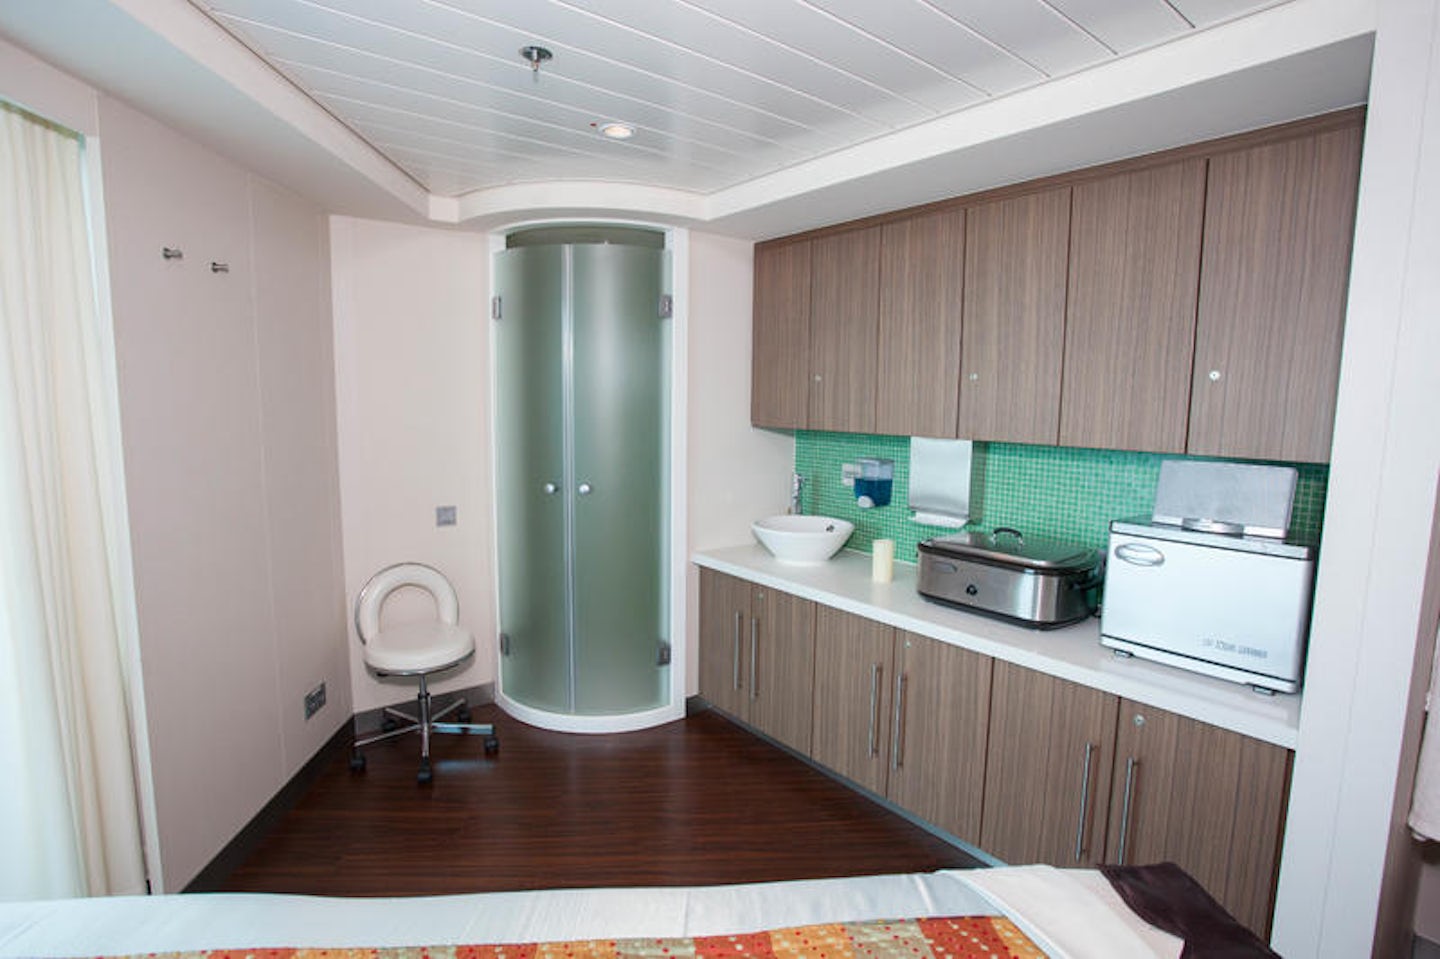 Treatment Room on Celebrity Eclipse